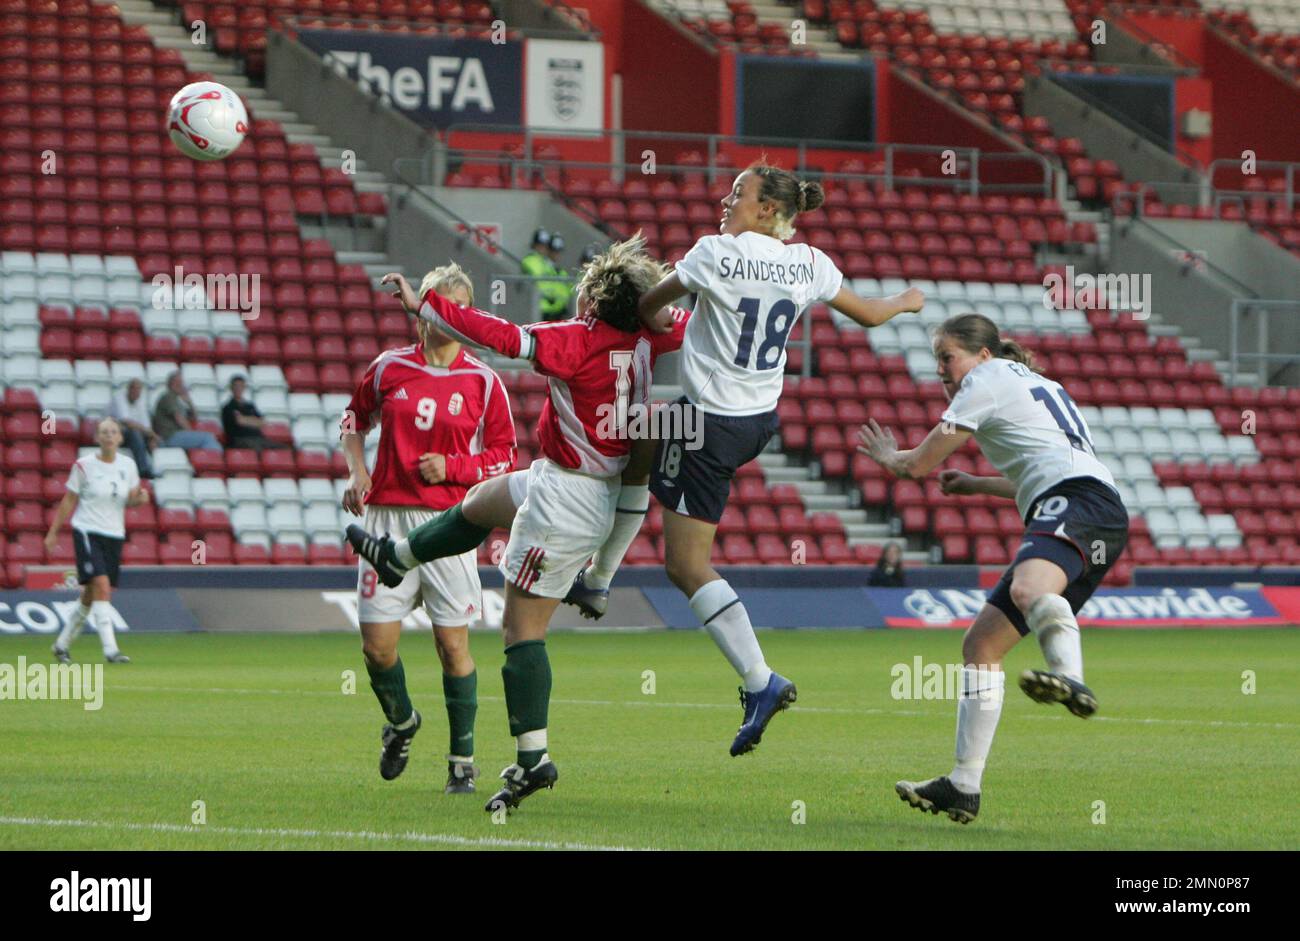 England v Hungary Women's football 2006 World Cup Qualifier  at St Marys stadium Southampton. Lianne Sanderson gets a header towards goal.  image is bound by Dataco restrictions on how it can be used. EDITORIAL USE ONLY No use with unauthorised audio, video, data, fixture lists, club/league logos or “live” services. Online in-match use limited to 120 images, no video emulation. No use in betting, games or single club/league/player publications Stock Photo